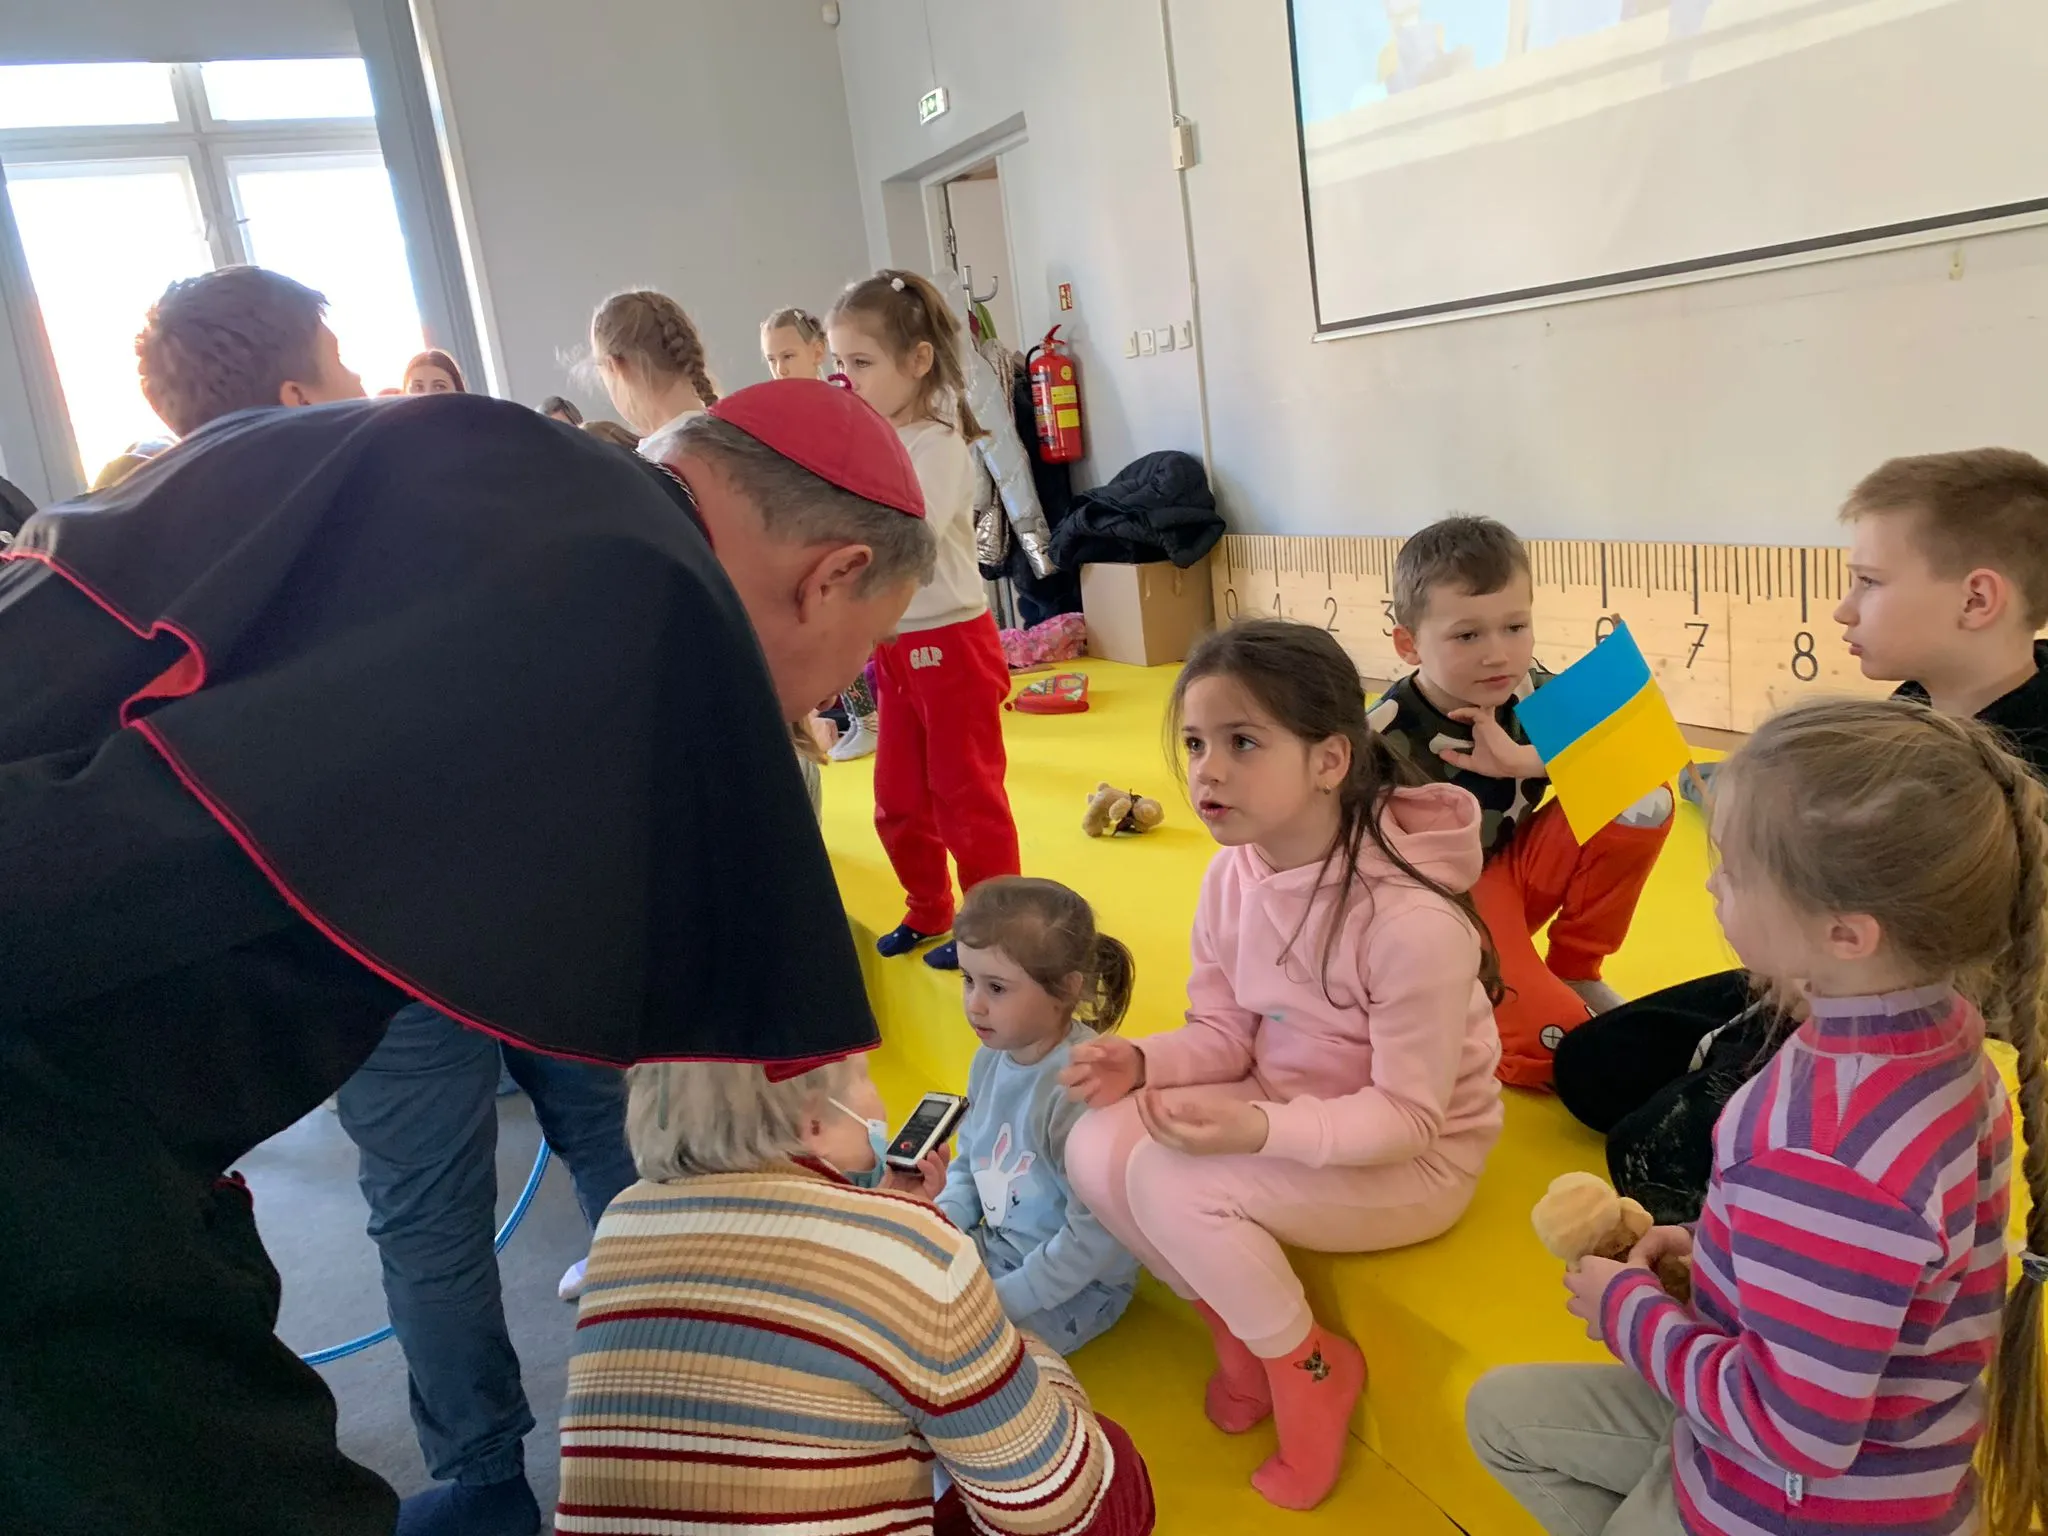 Archbishop Stankevičs greets the children. Archdiocese of Riga